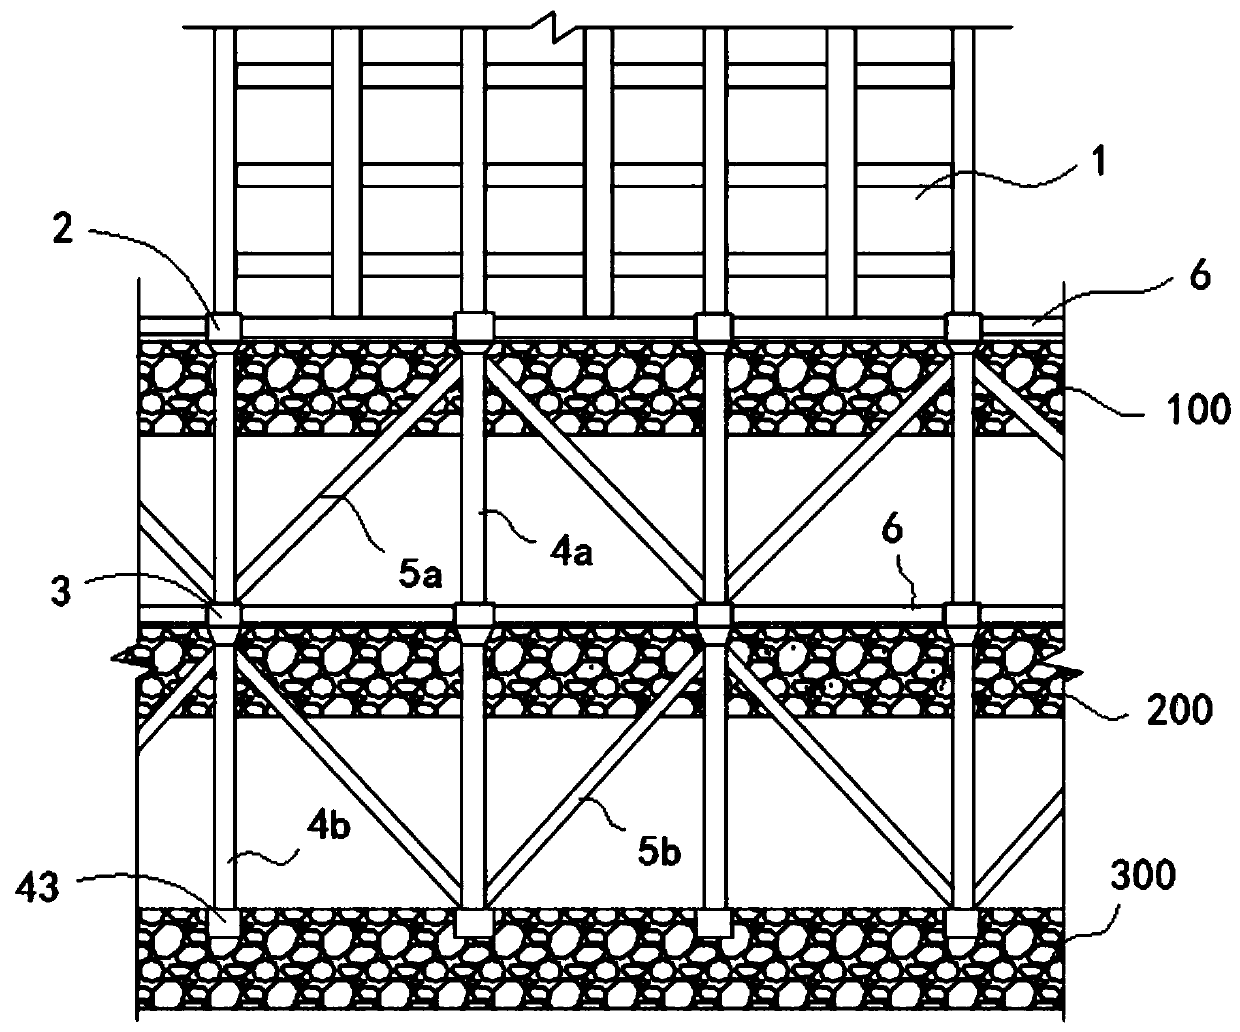 High-altitude cantilever high-supporting-formwork structure